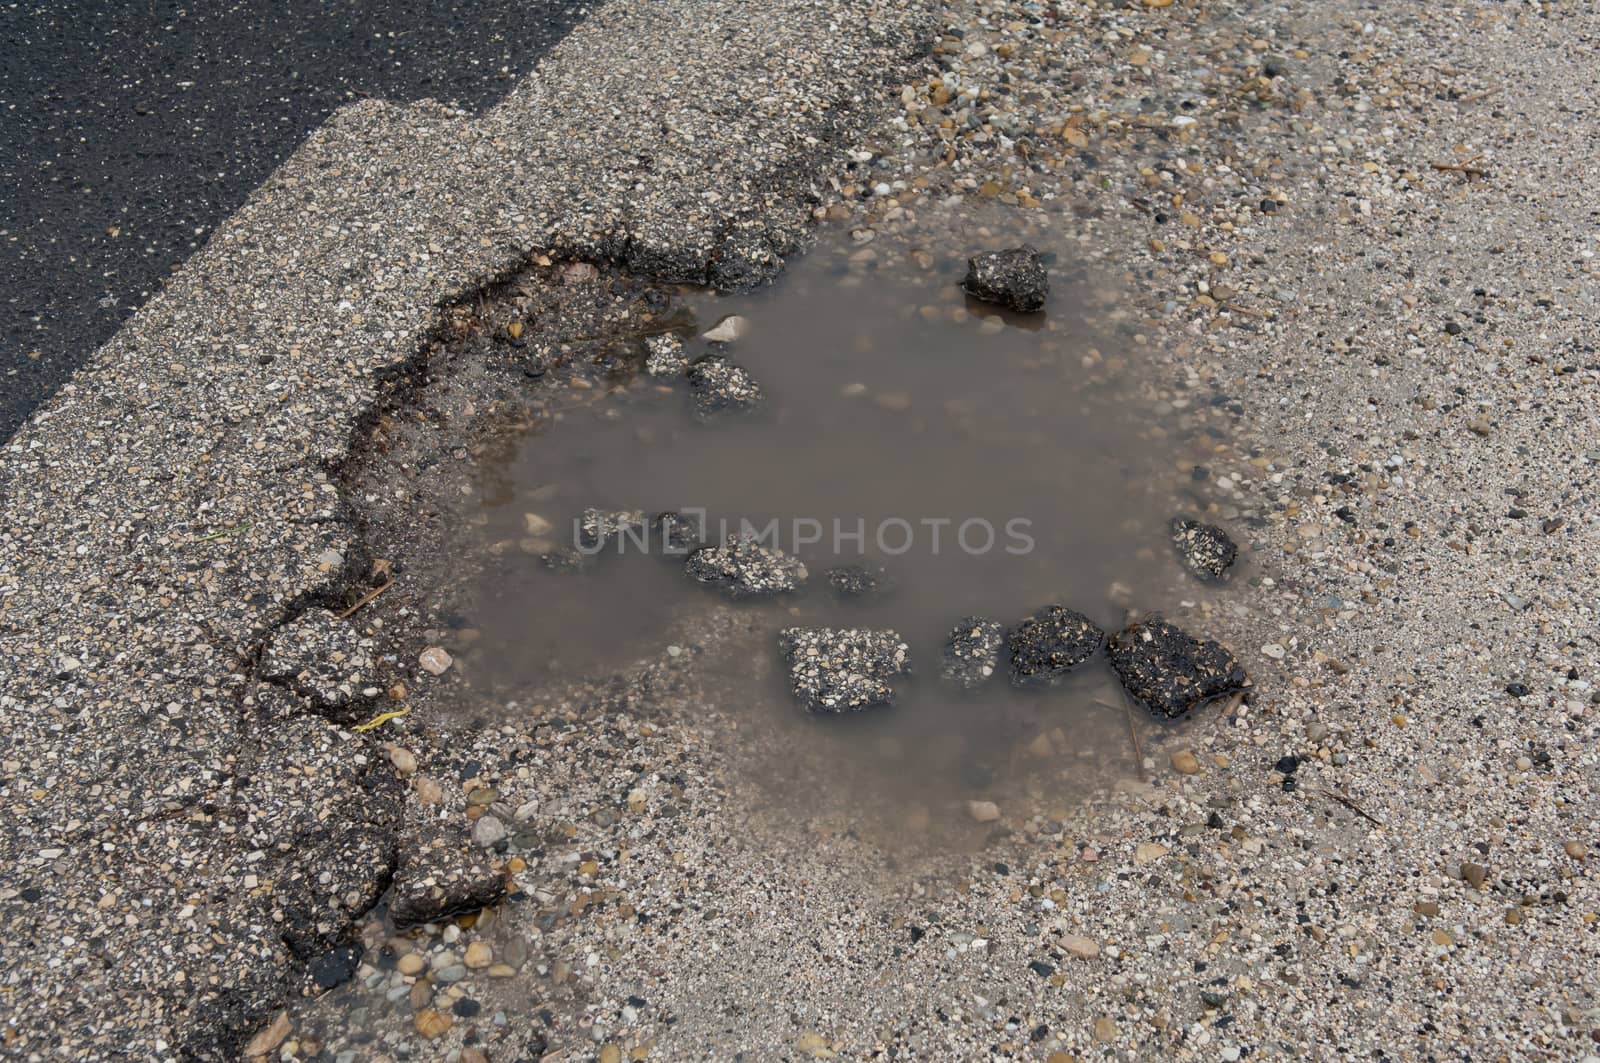 Asphalt road with pothole filled with water and asphalt pieces by horizonphoto